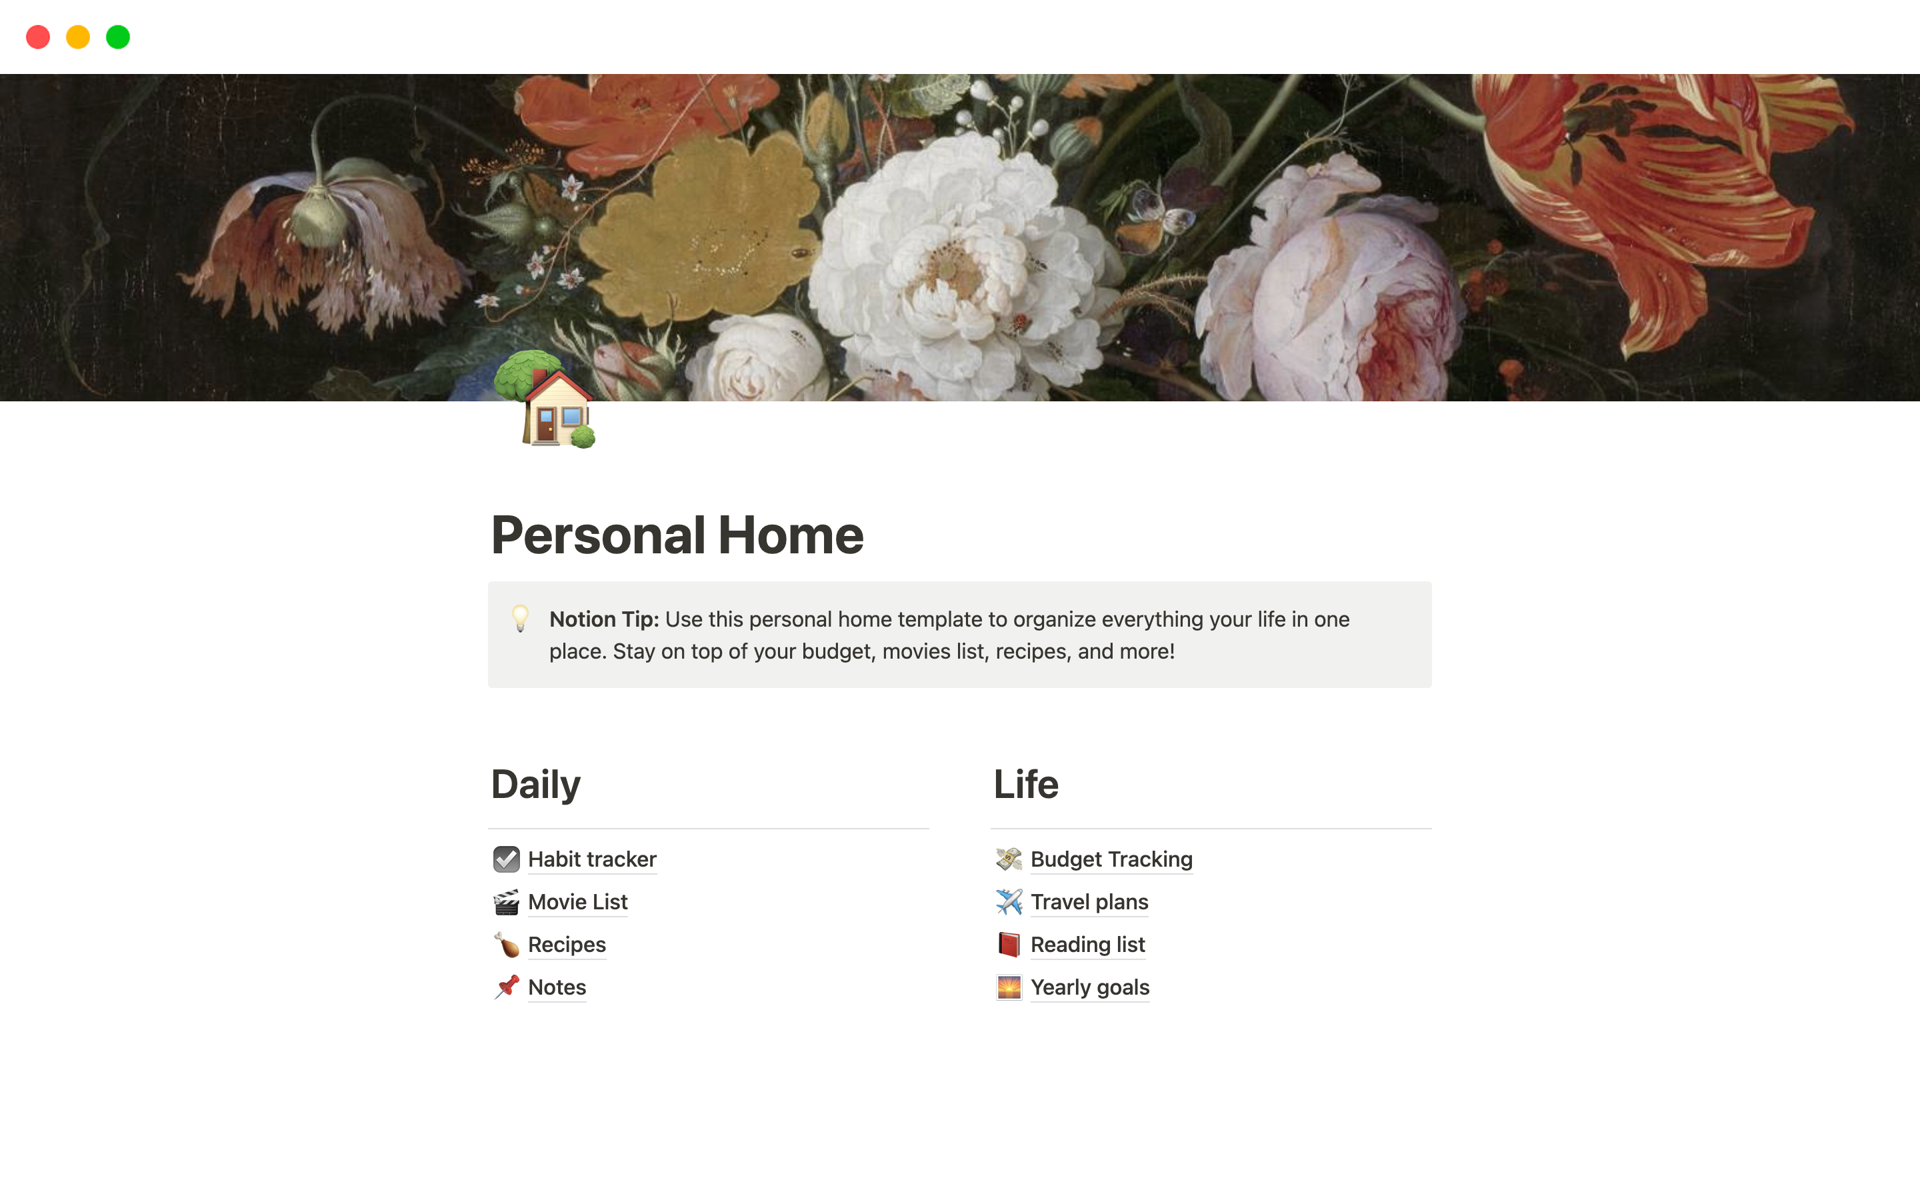 Simplify life now! Get the Personal Home Template today and reclaim control.